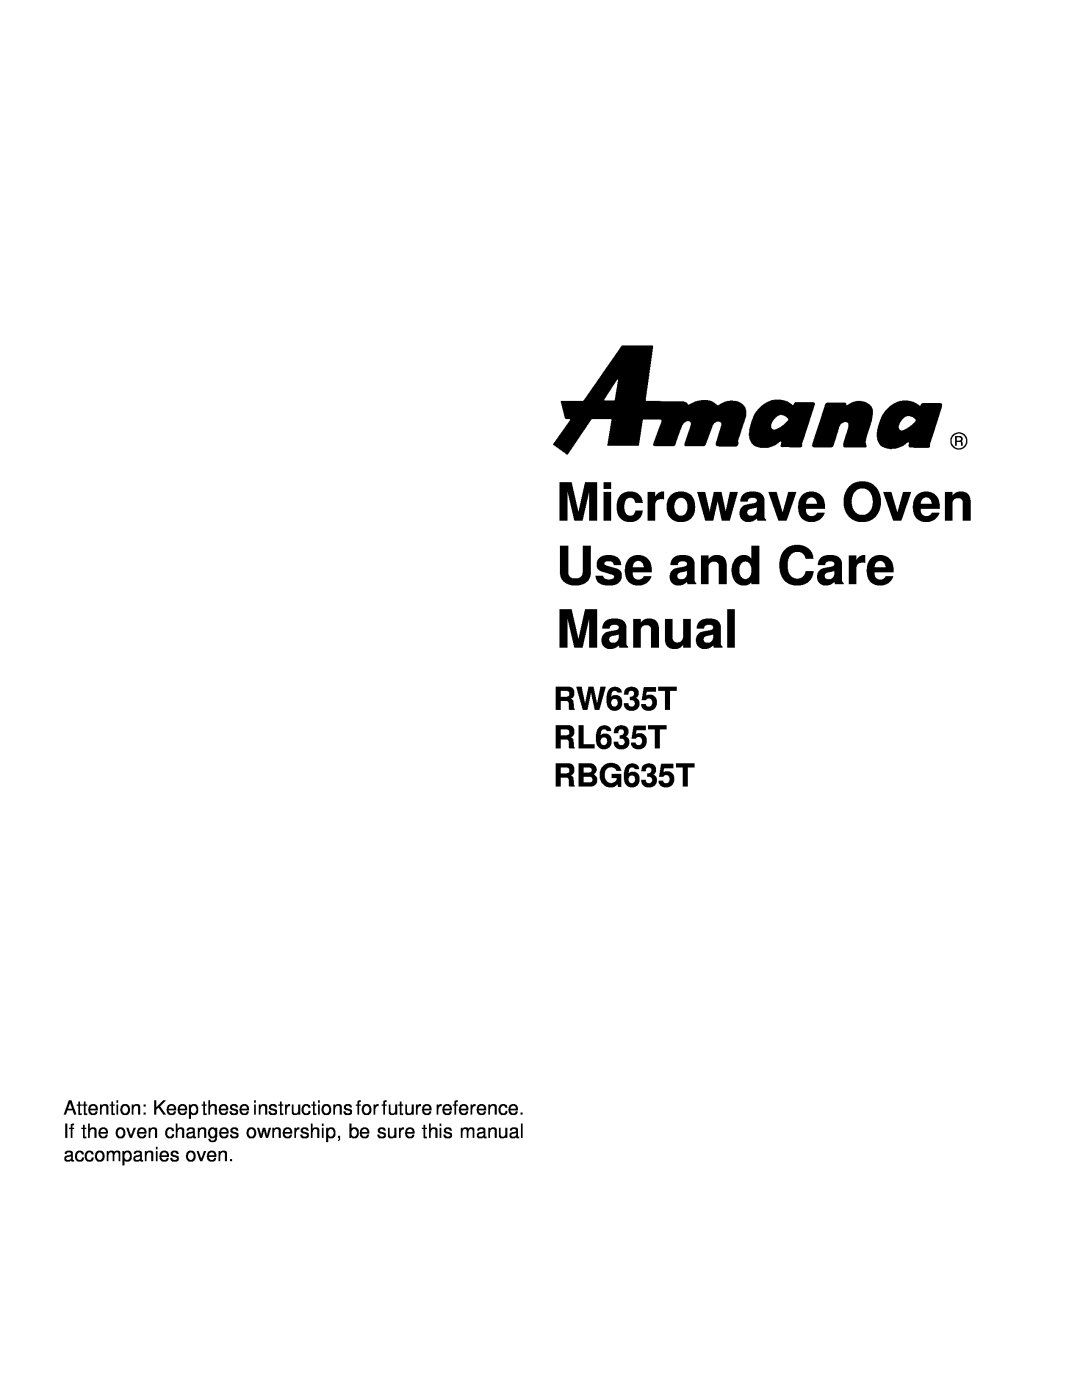 Amana manual RW635T RL635T RBG635T, Microwave Oven Use and Care Manual 